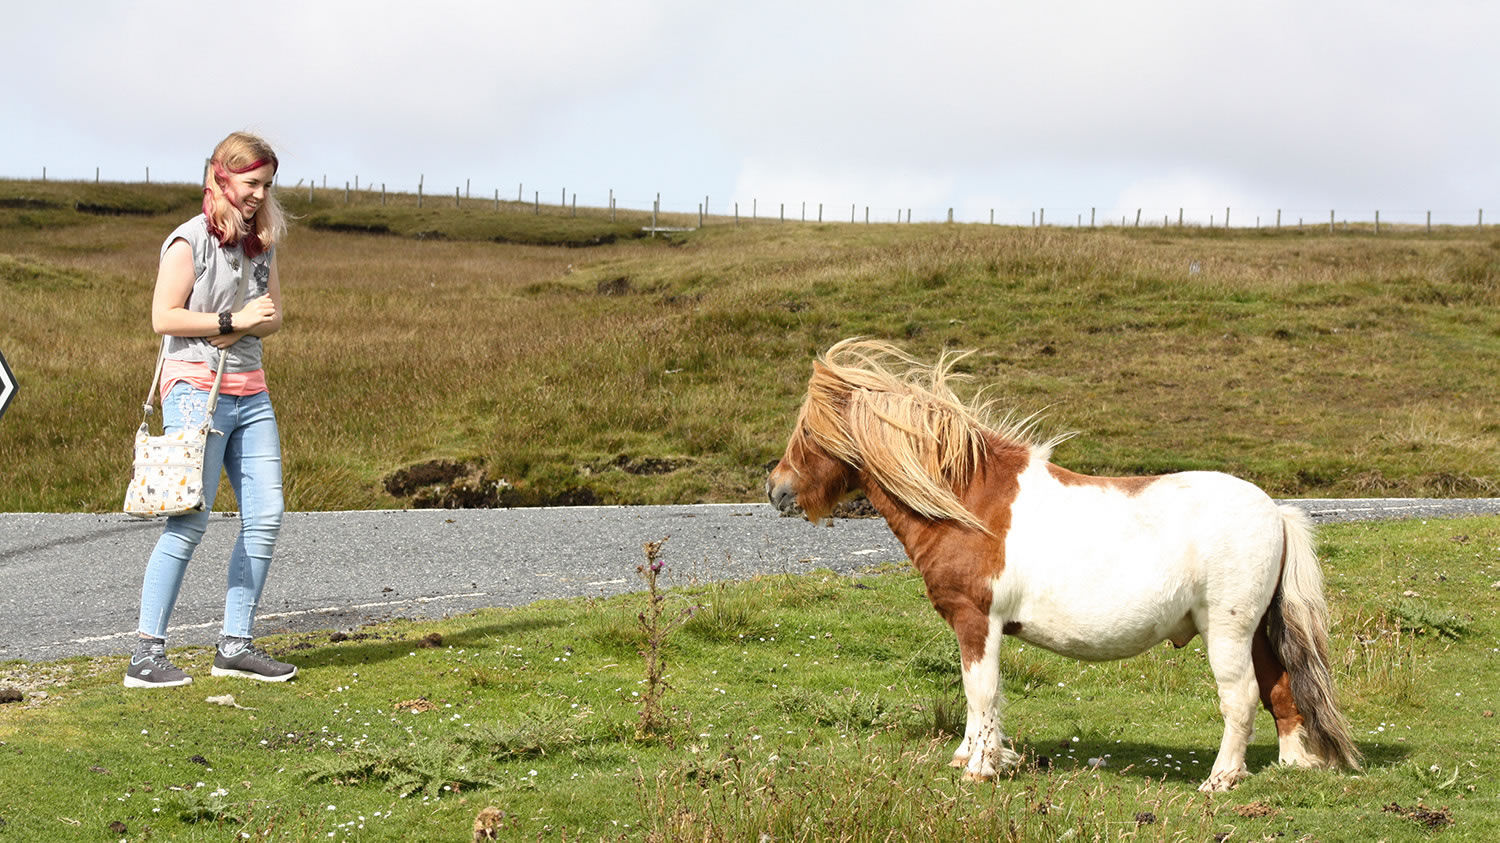 Shetland Ponies are naturally curious